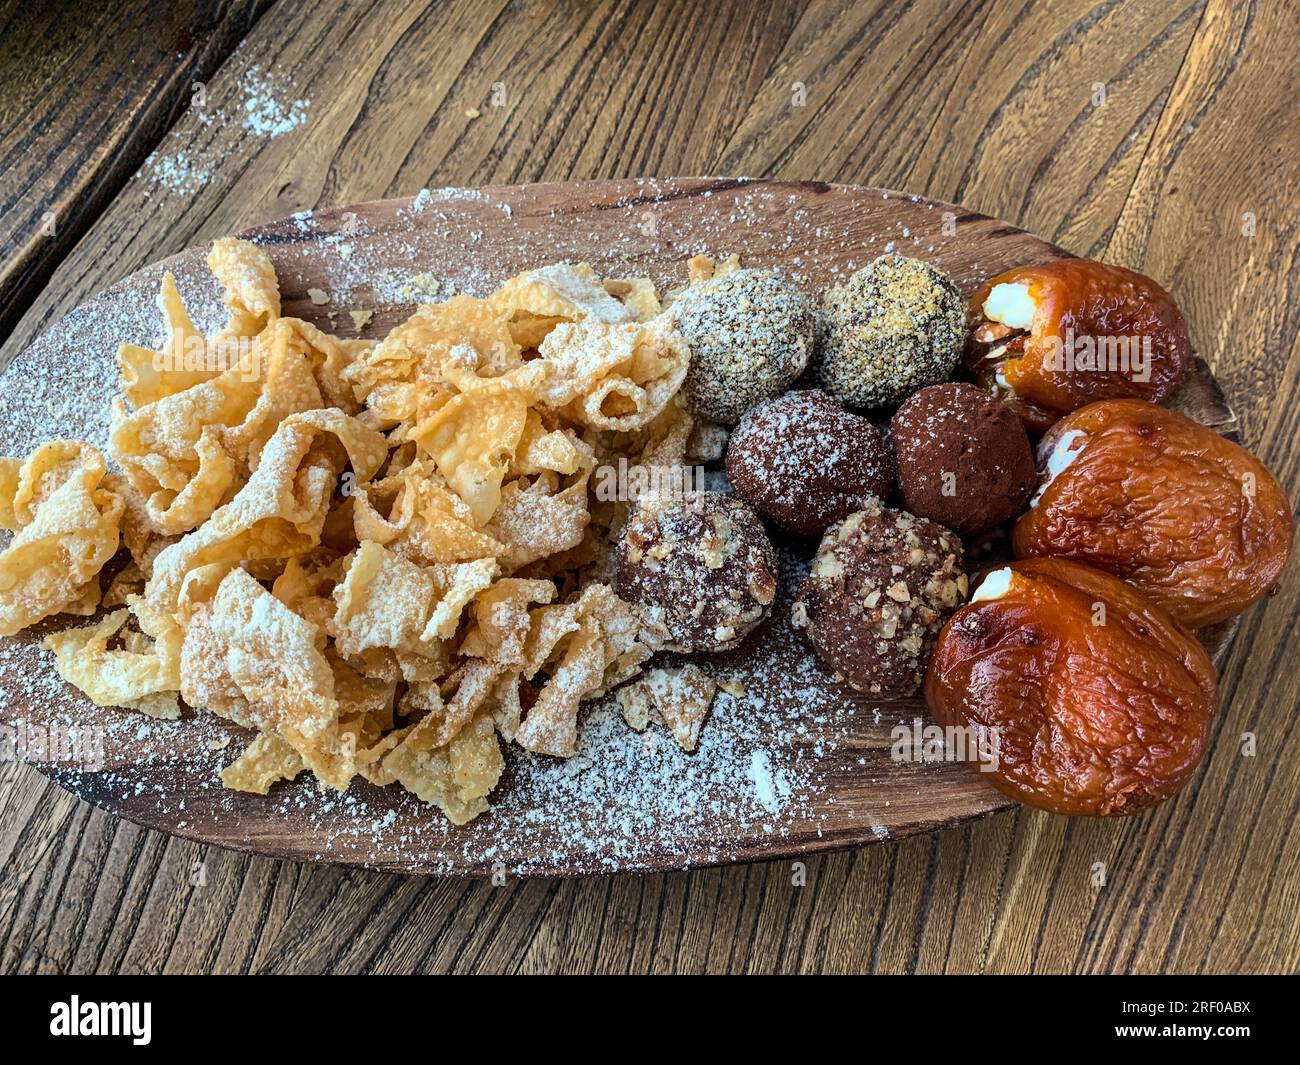 Kazakhstan, Almaty. Assorted Sweets for Dessert: Fried Noodles, Truffles (Chocolates dusted with Pecan), Apricots stuffed with Mascarpone Cream Cheese Stock Photo